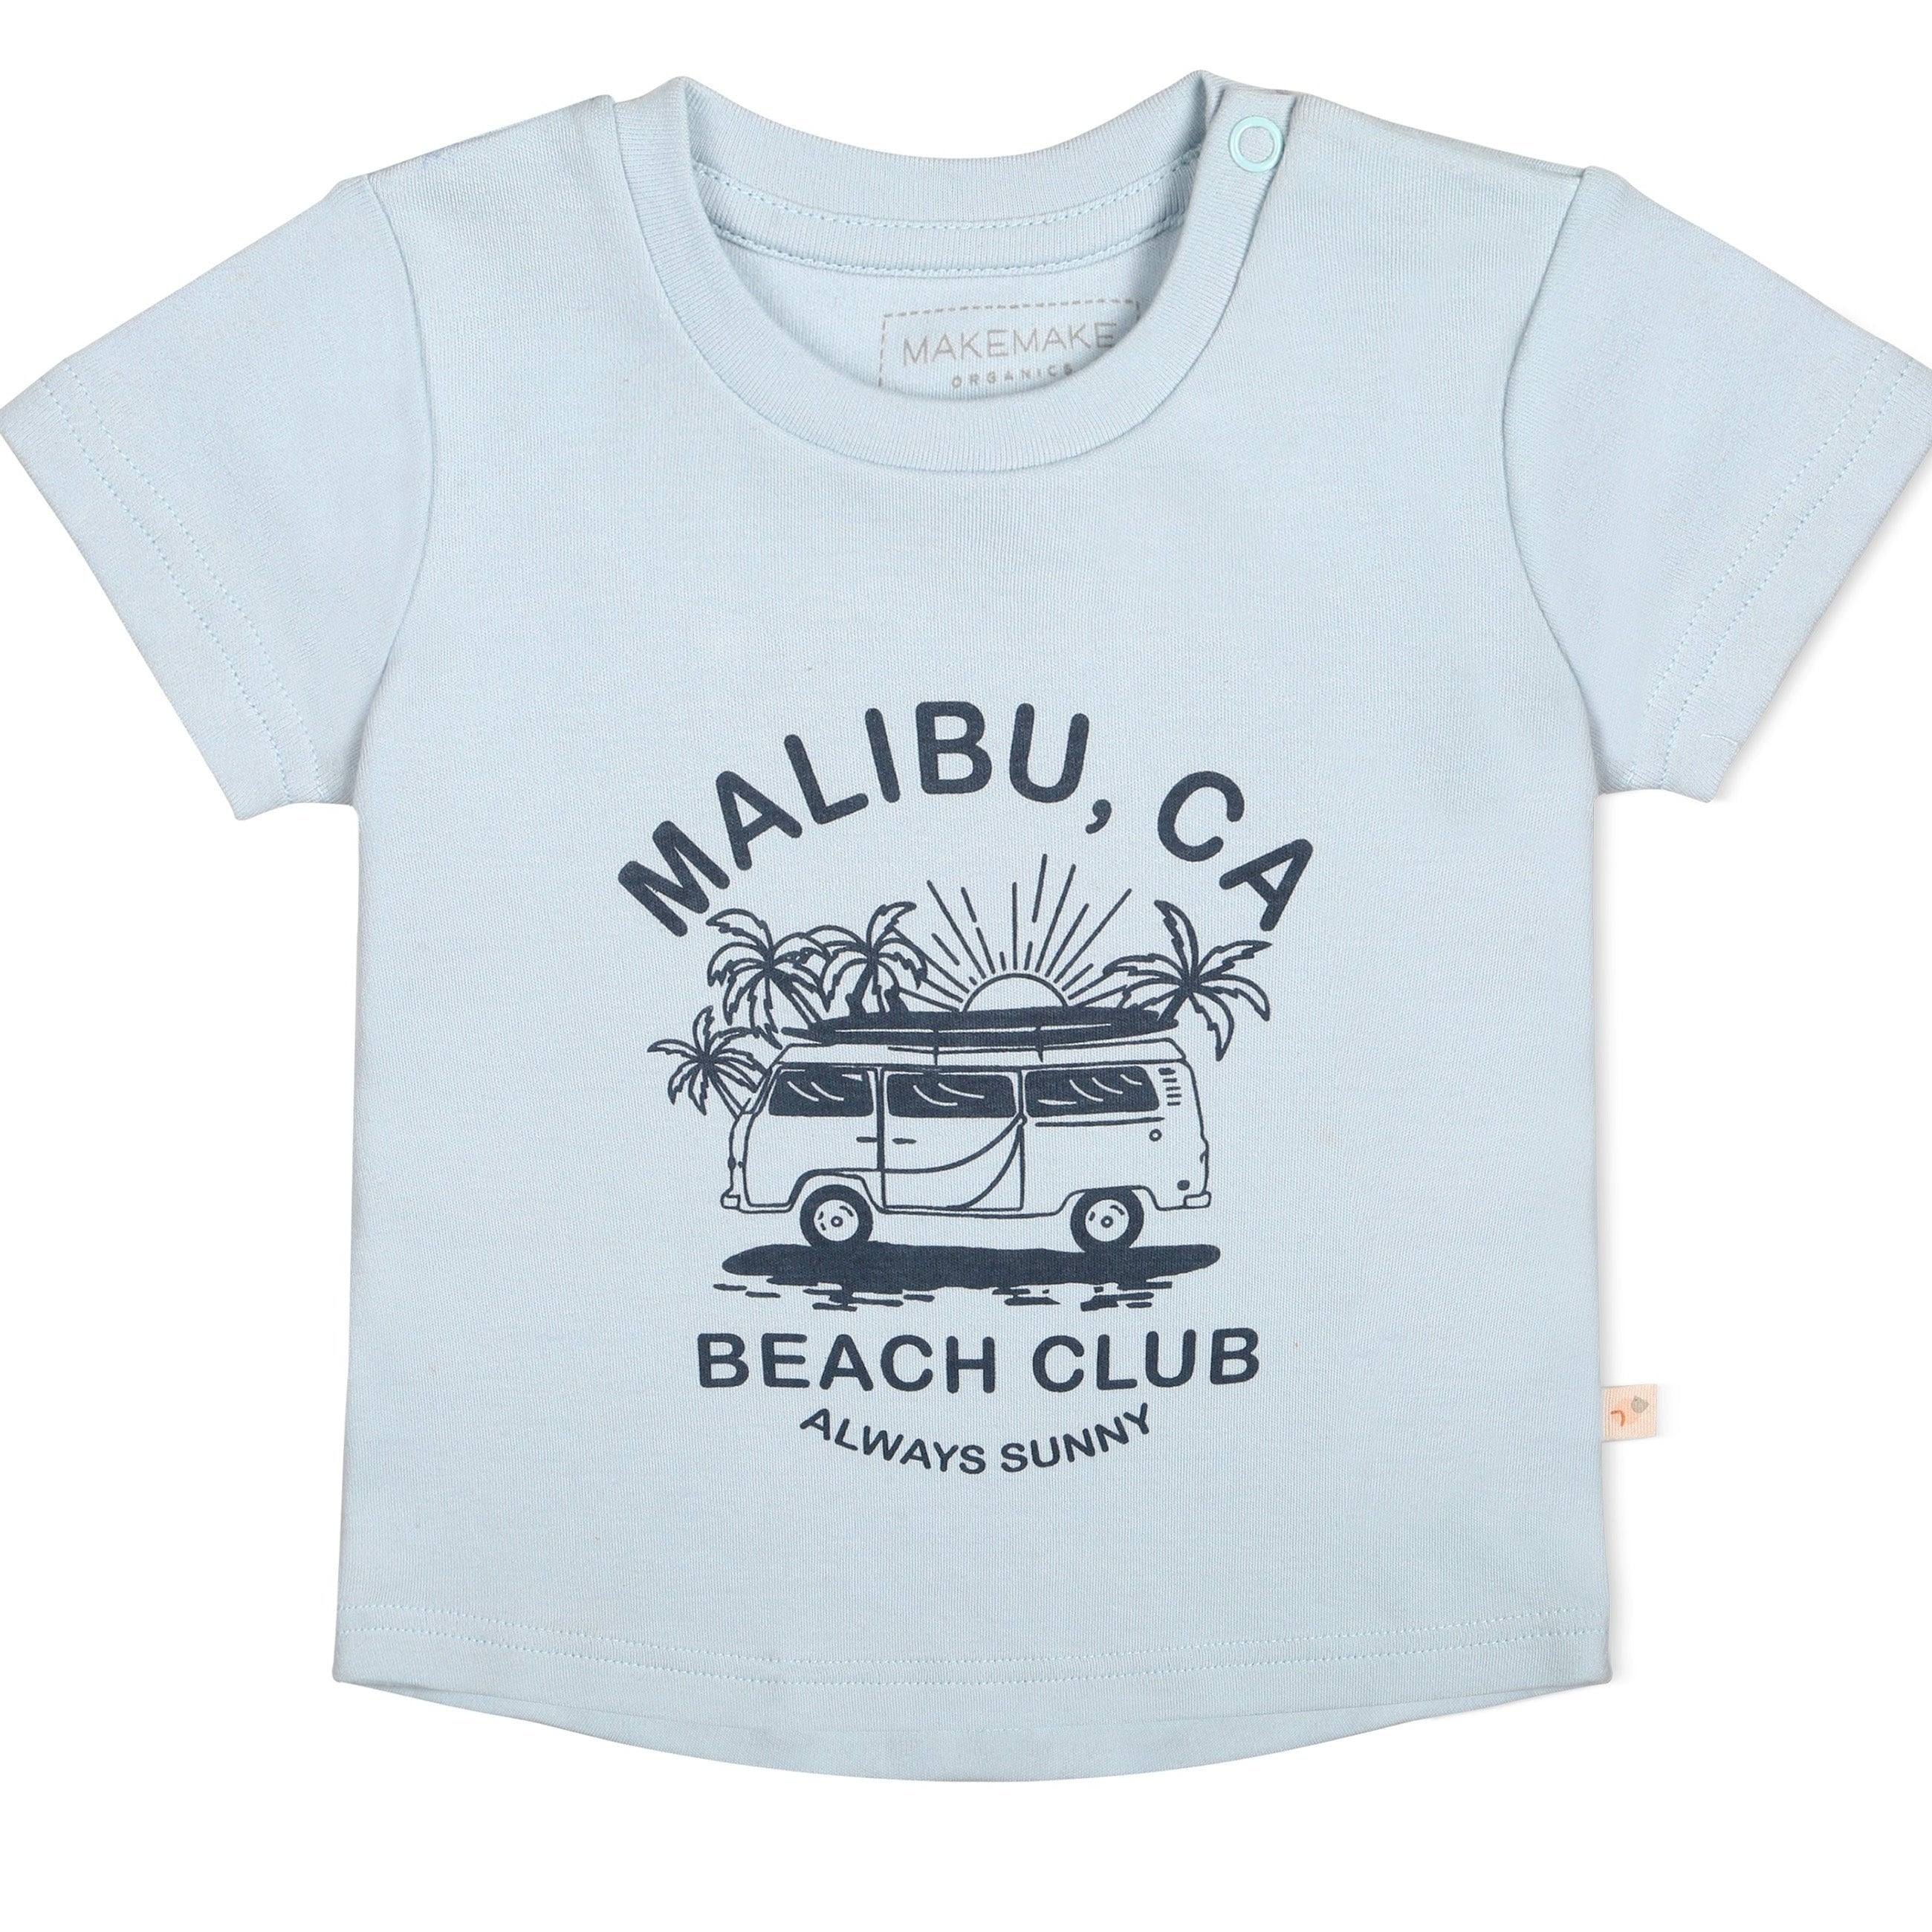 Light blue toddler Organic Crew Neck Tee - Malibu Beach Club featuring a graphic of a vintage van under palm trees with the text "malibu, ca beach club 4lways sunny" by Makemake Organics.